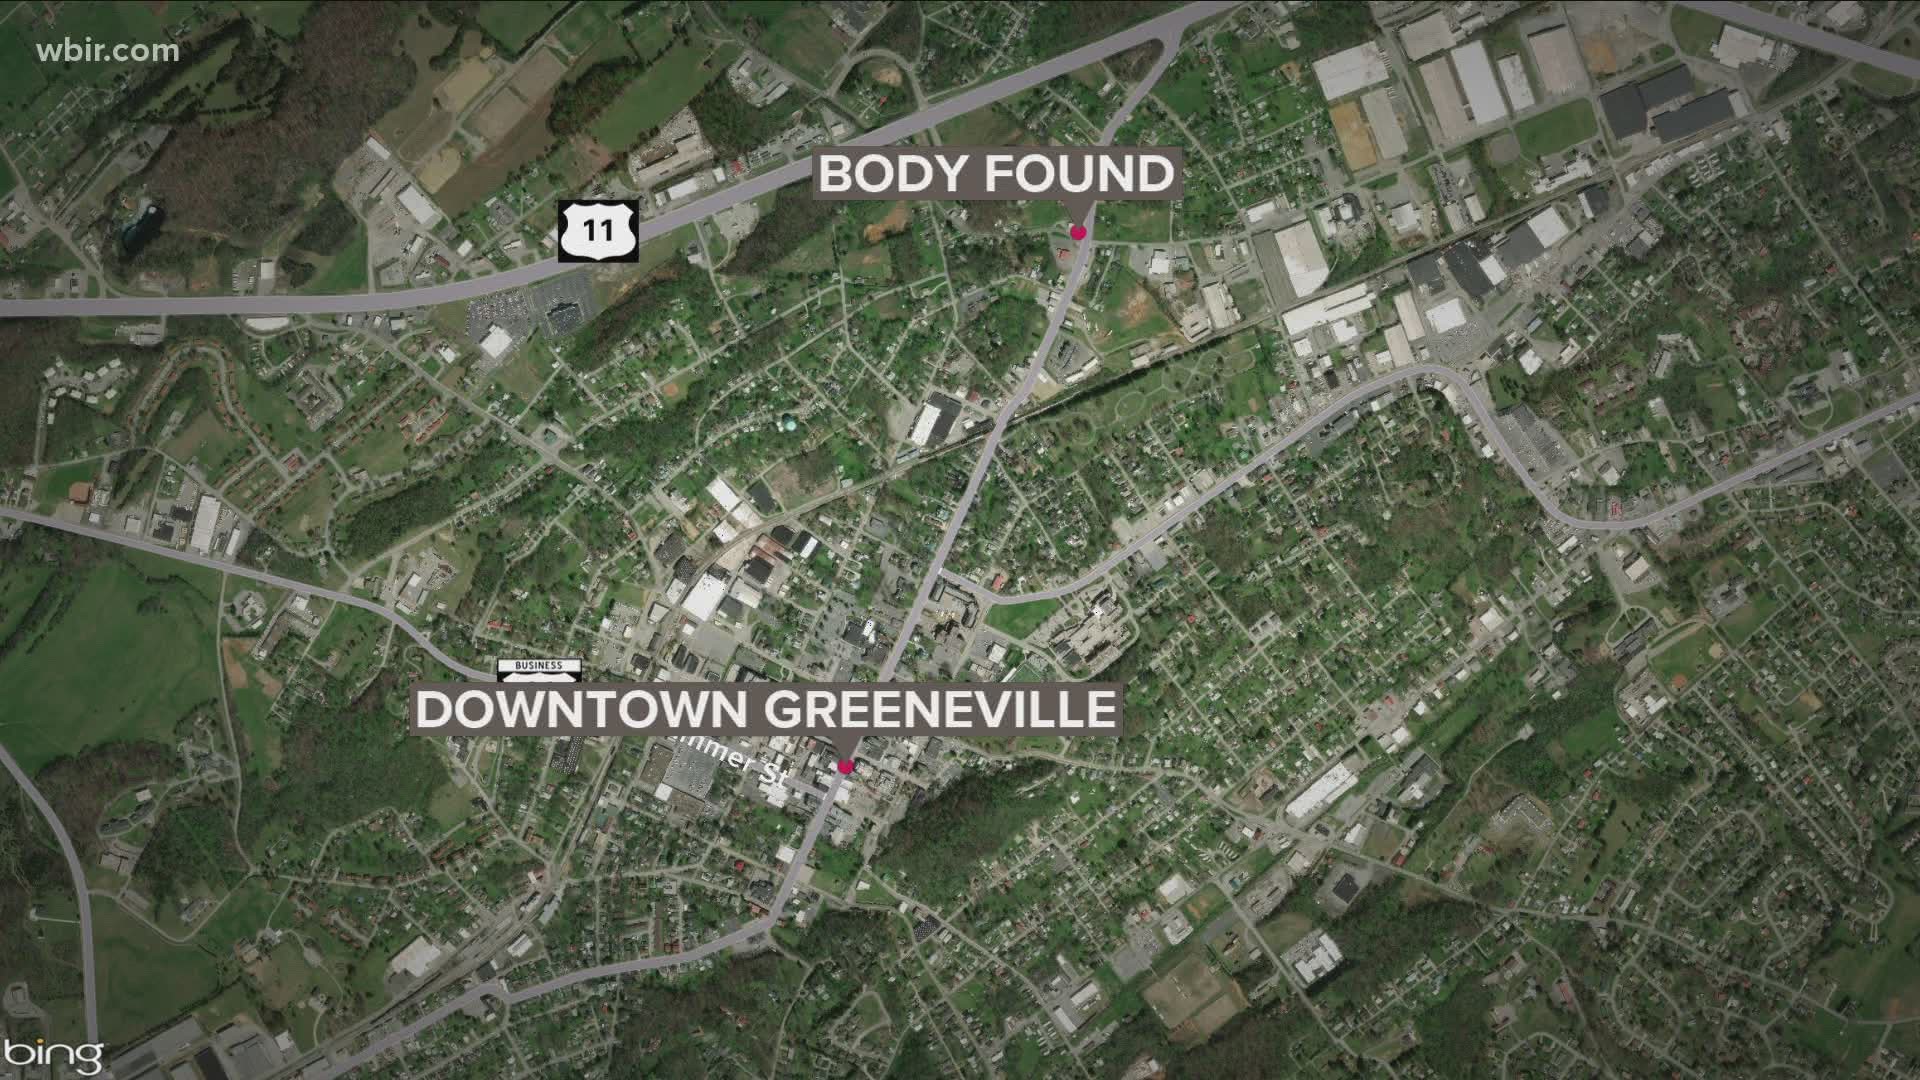 The Greenville Police Department says it is investigating the death of a 2-month-old baby.